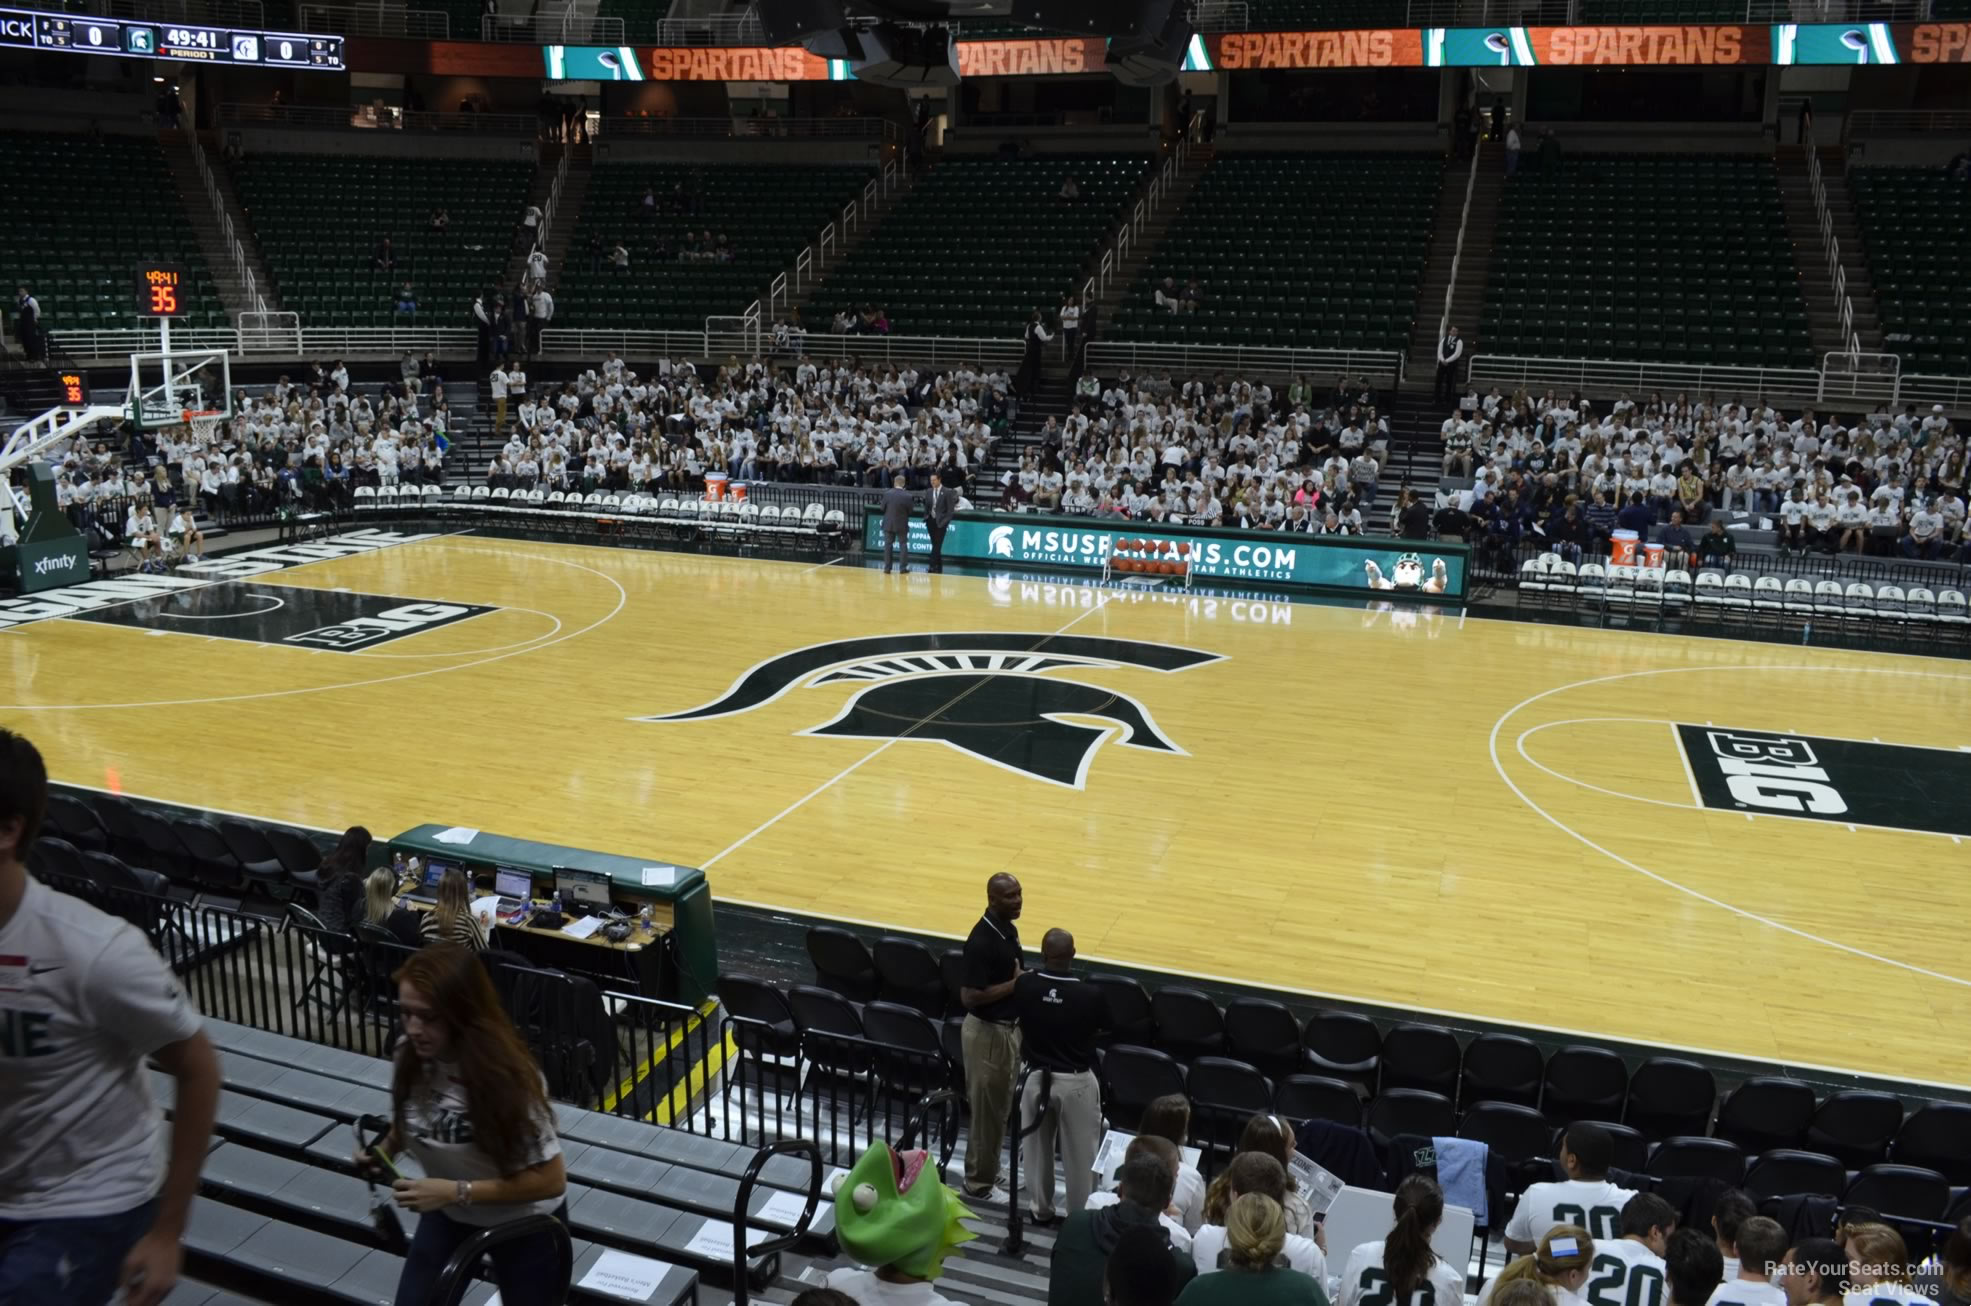 section 127, row 13 seat view  - breslin center